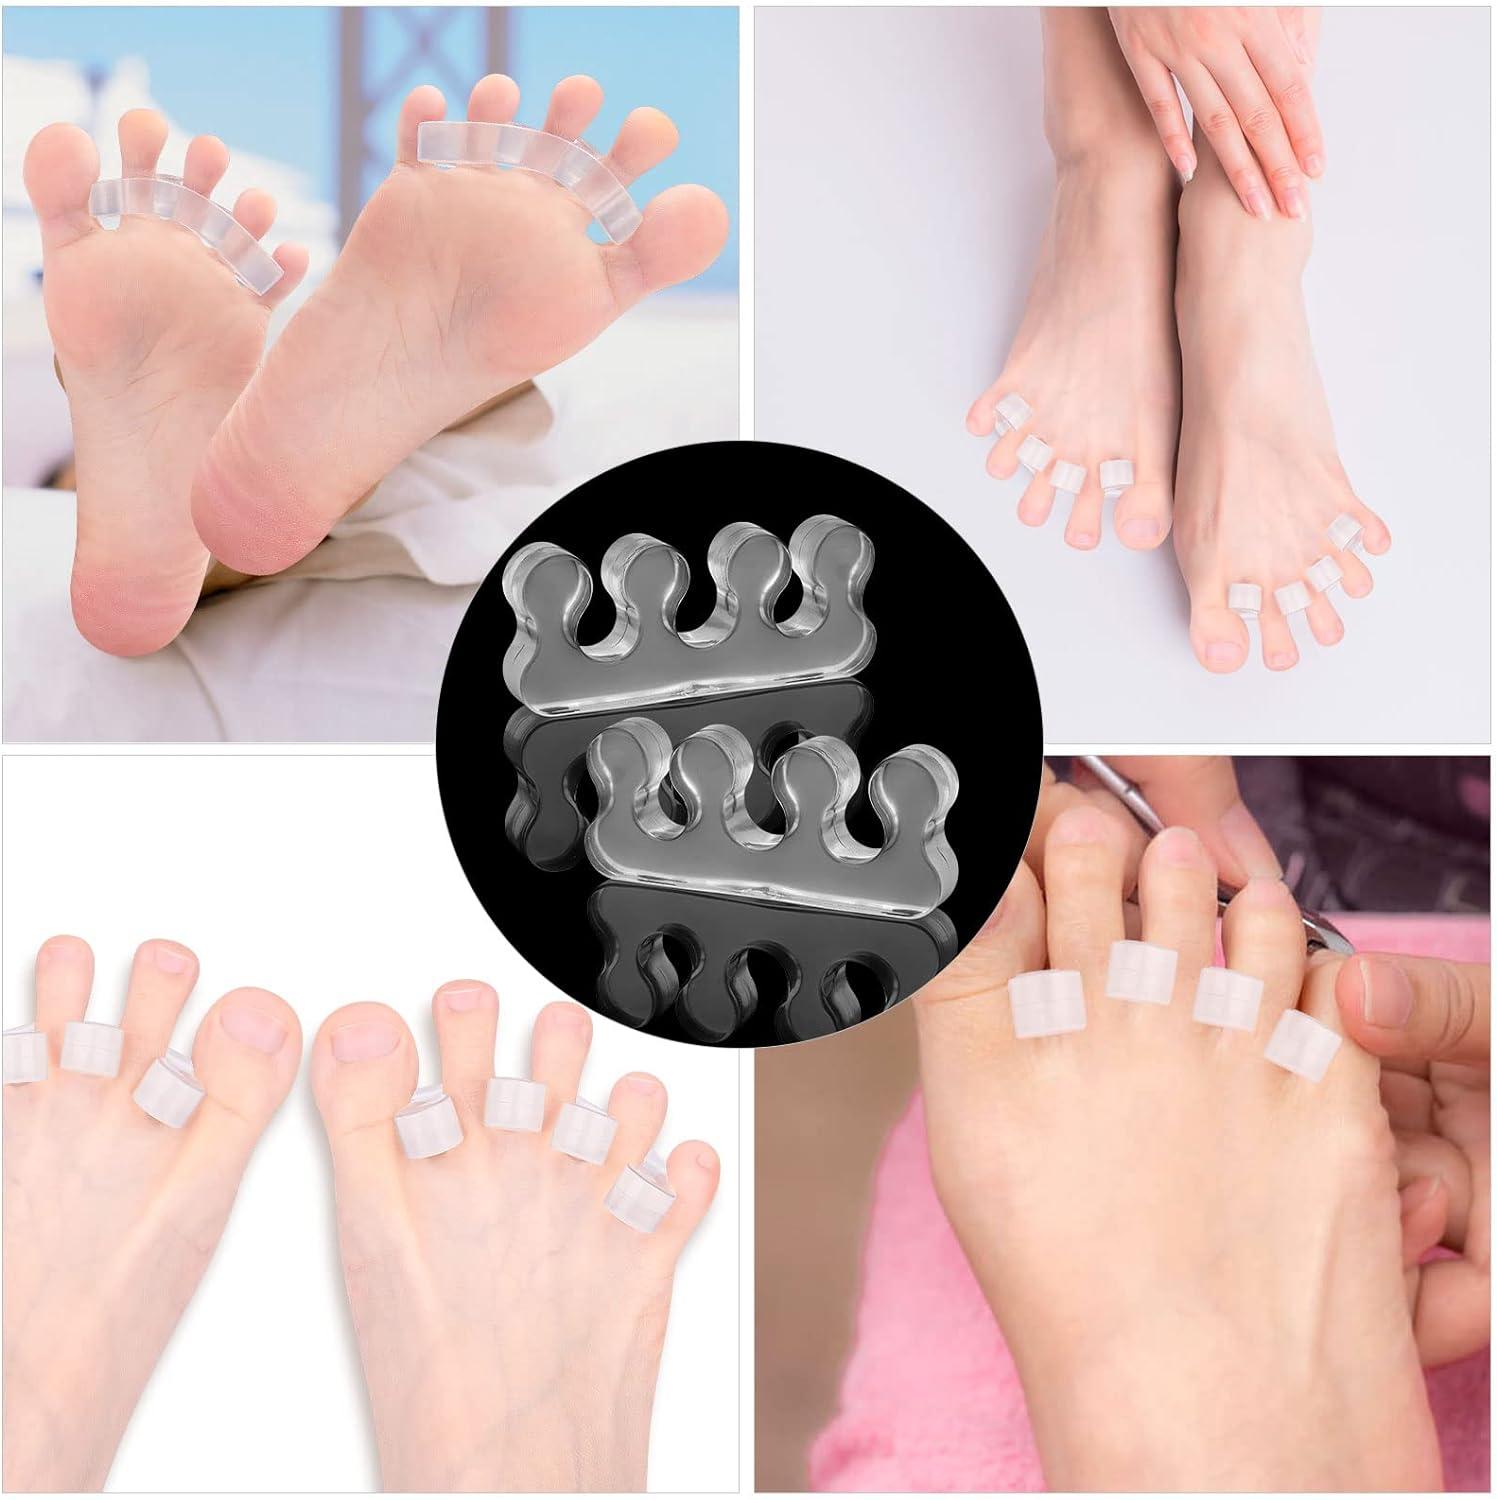 Toe Separators 4 Pairs Toe Spacers Bunion Correctors and Bunion Relief for  Fix Toes Hallux Valgus Yoga Toe Separators for Overlapping Toes Women